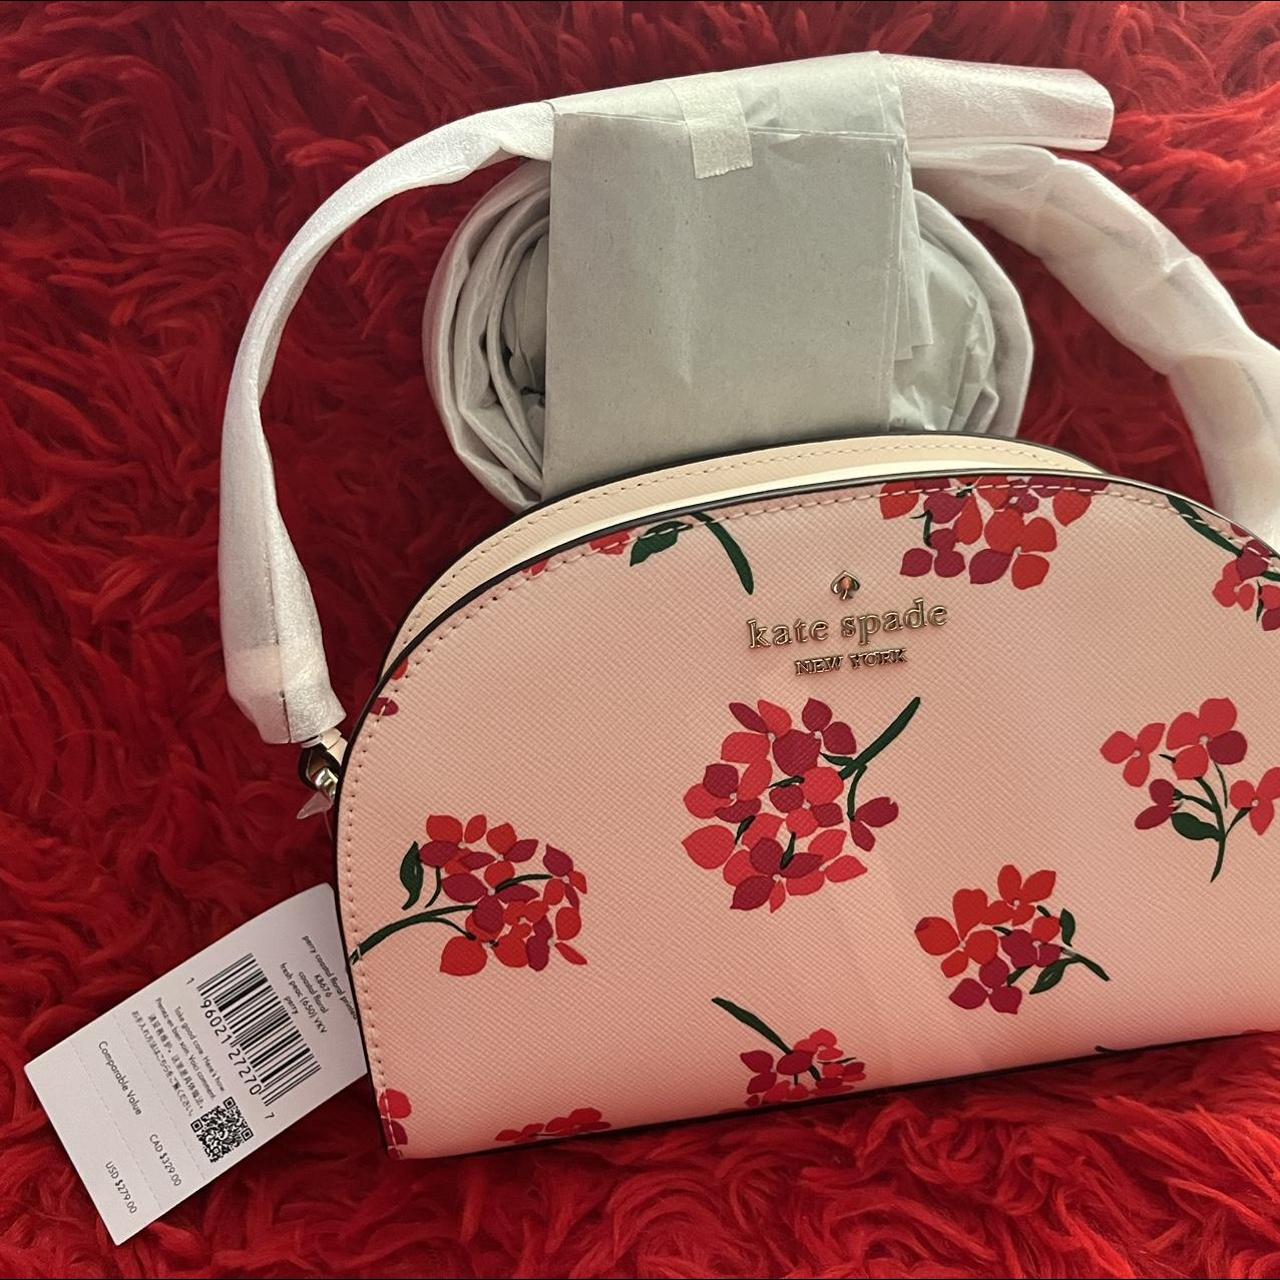 Kate Spade New York Perry Leather Crossbody